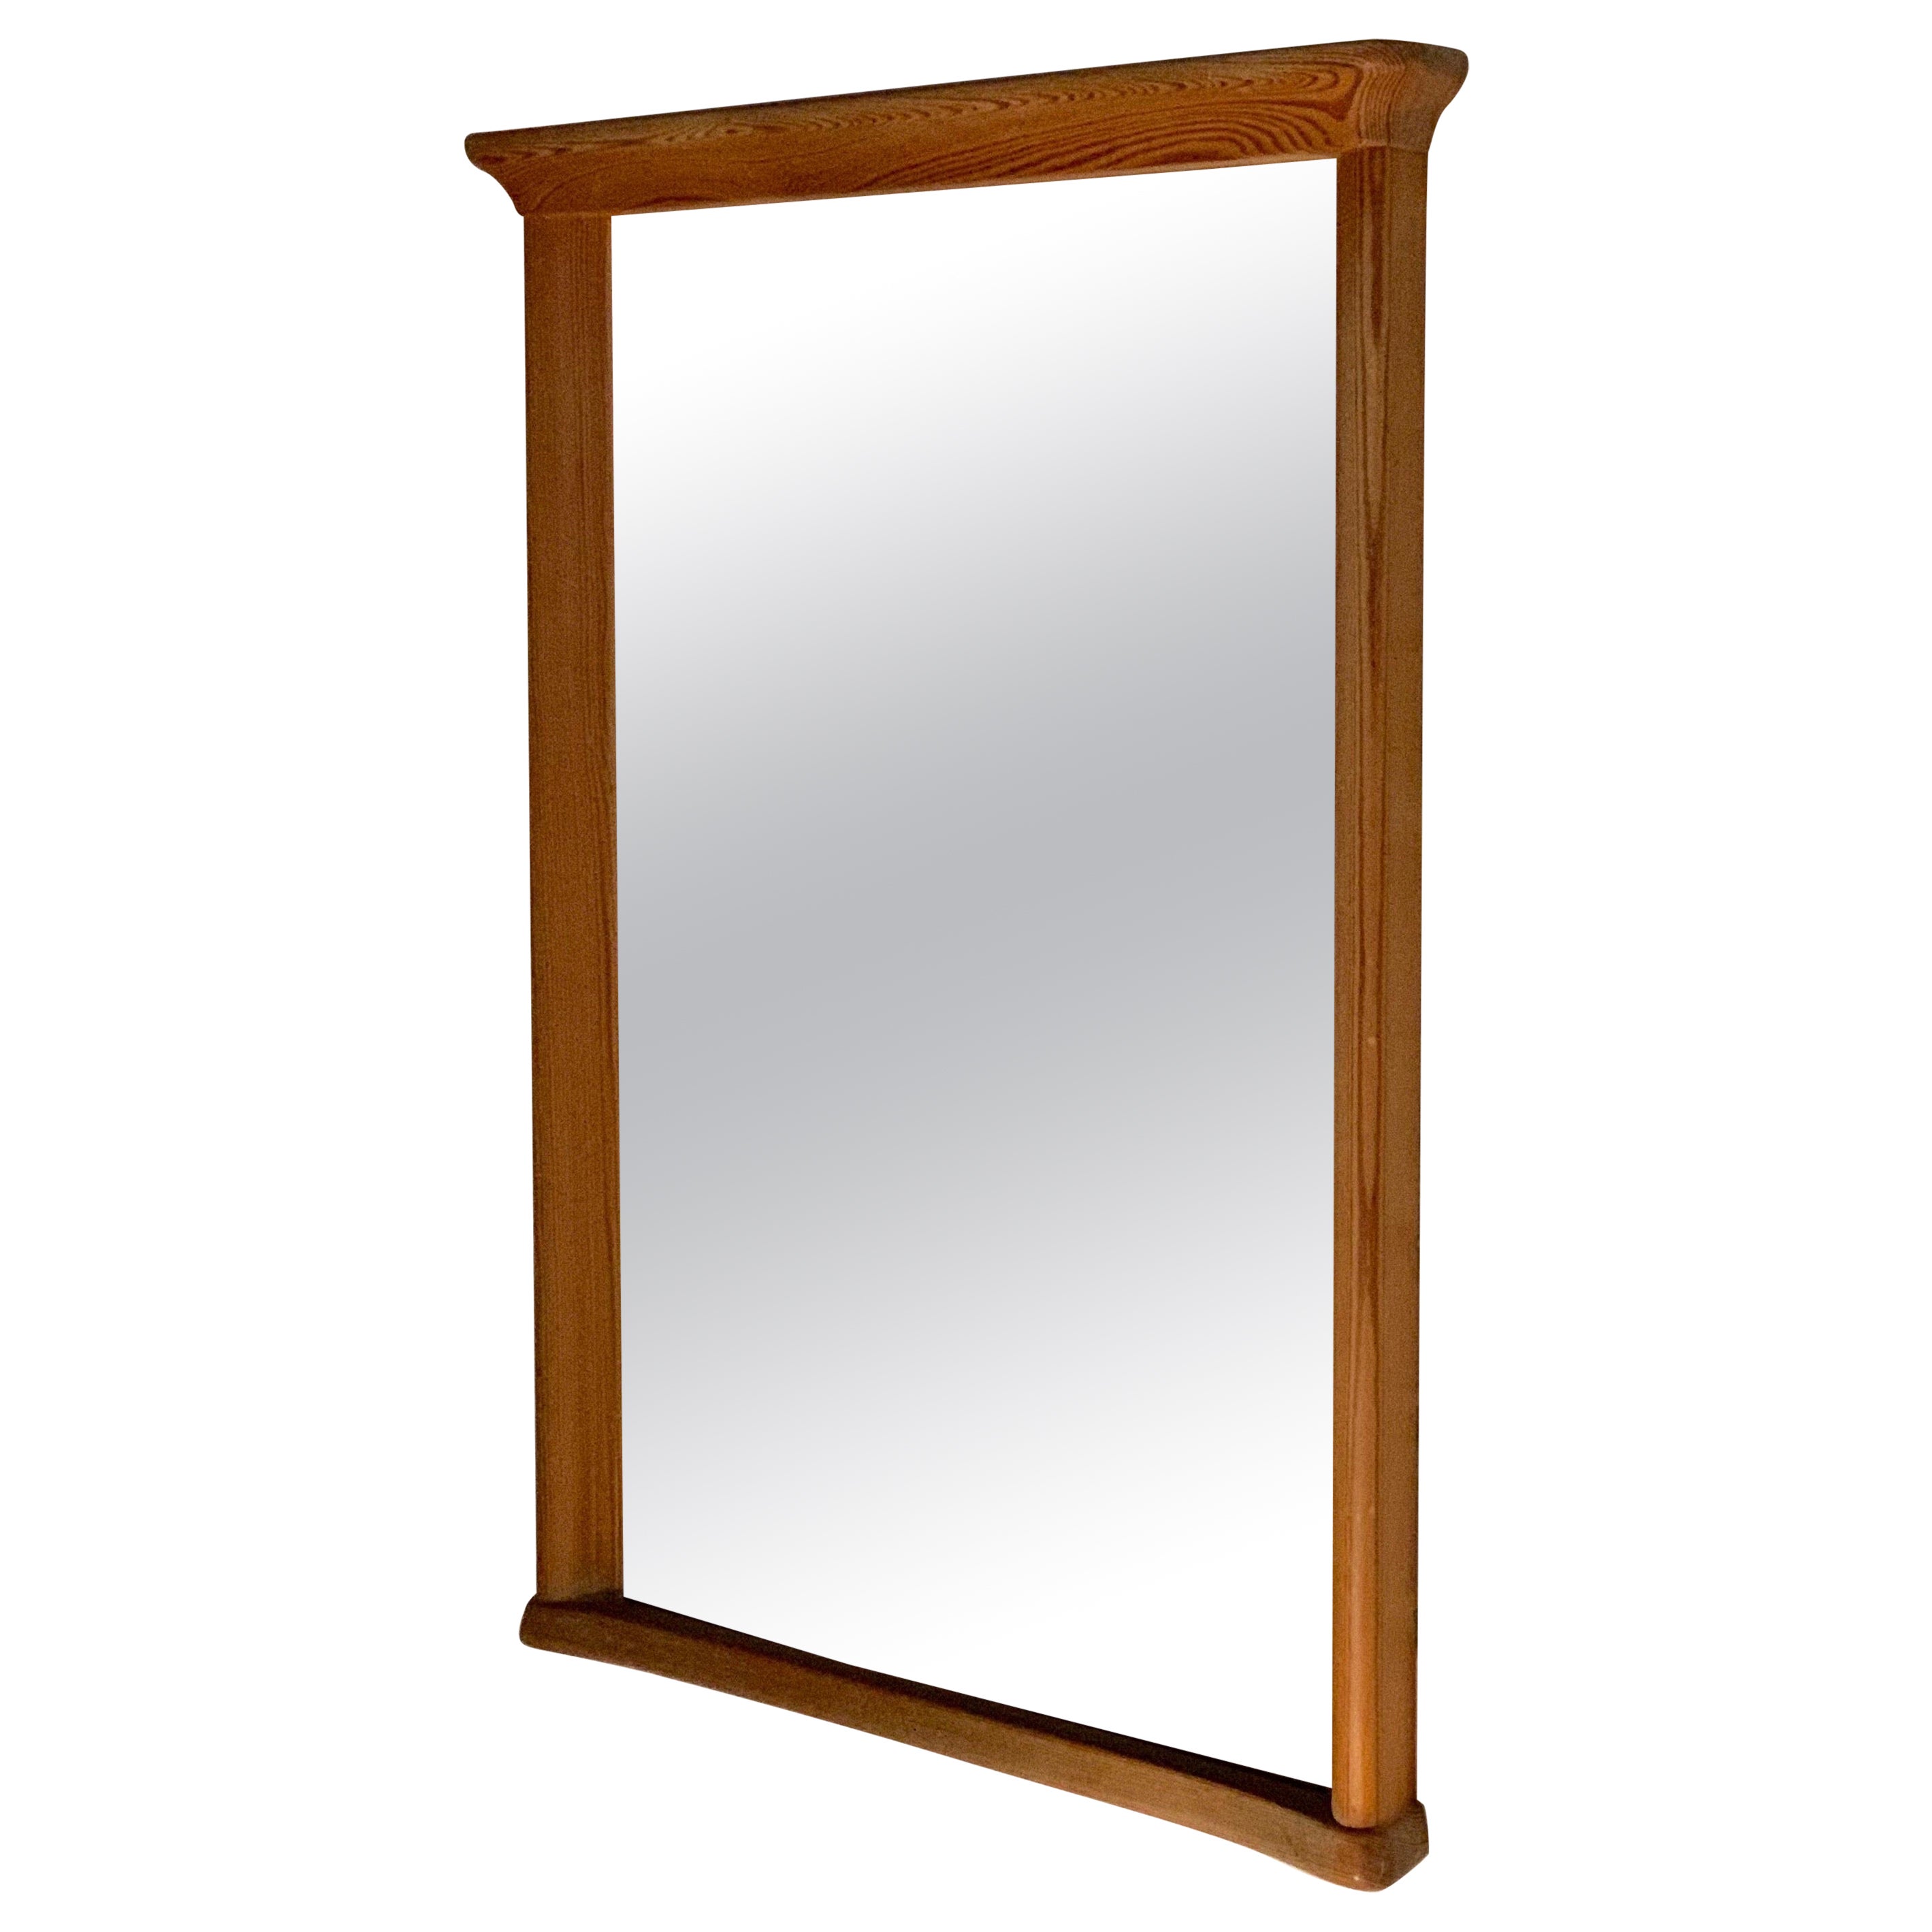 Modernist Carl Malmsten Pine 1940s Mirror, in the Vibe of Axel Einar Hjorth For Sale